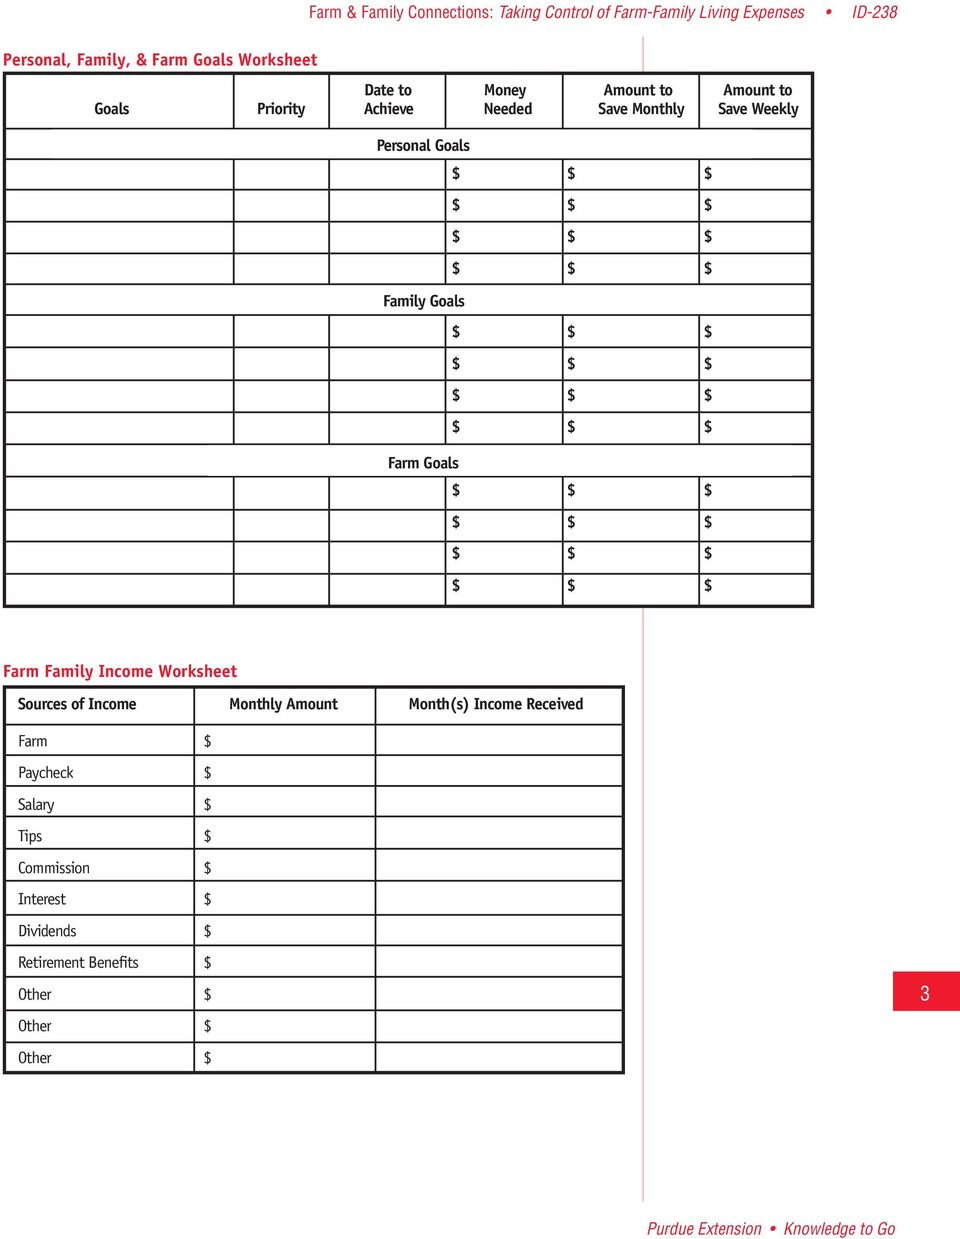 Farm Family Income Worksheet Sources of Income Monthly Amount Month(s) Income Received